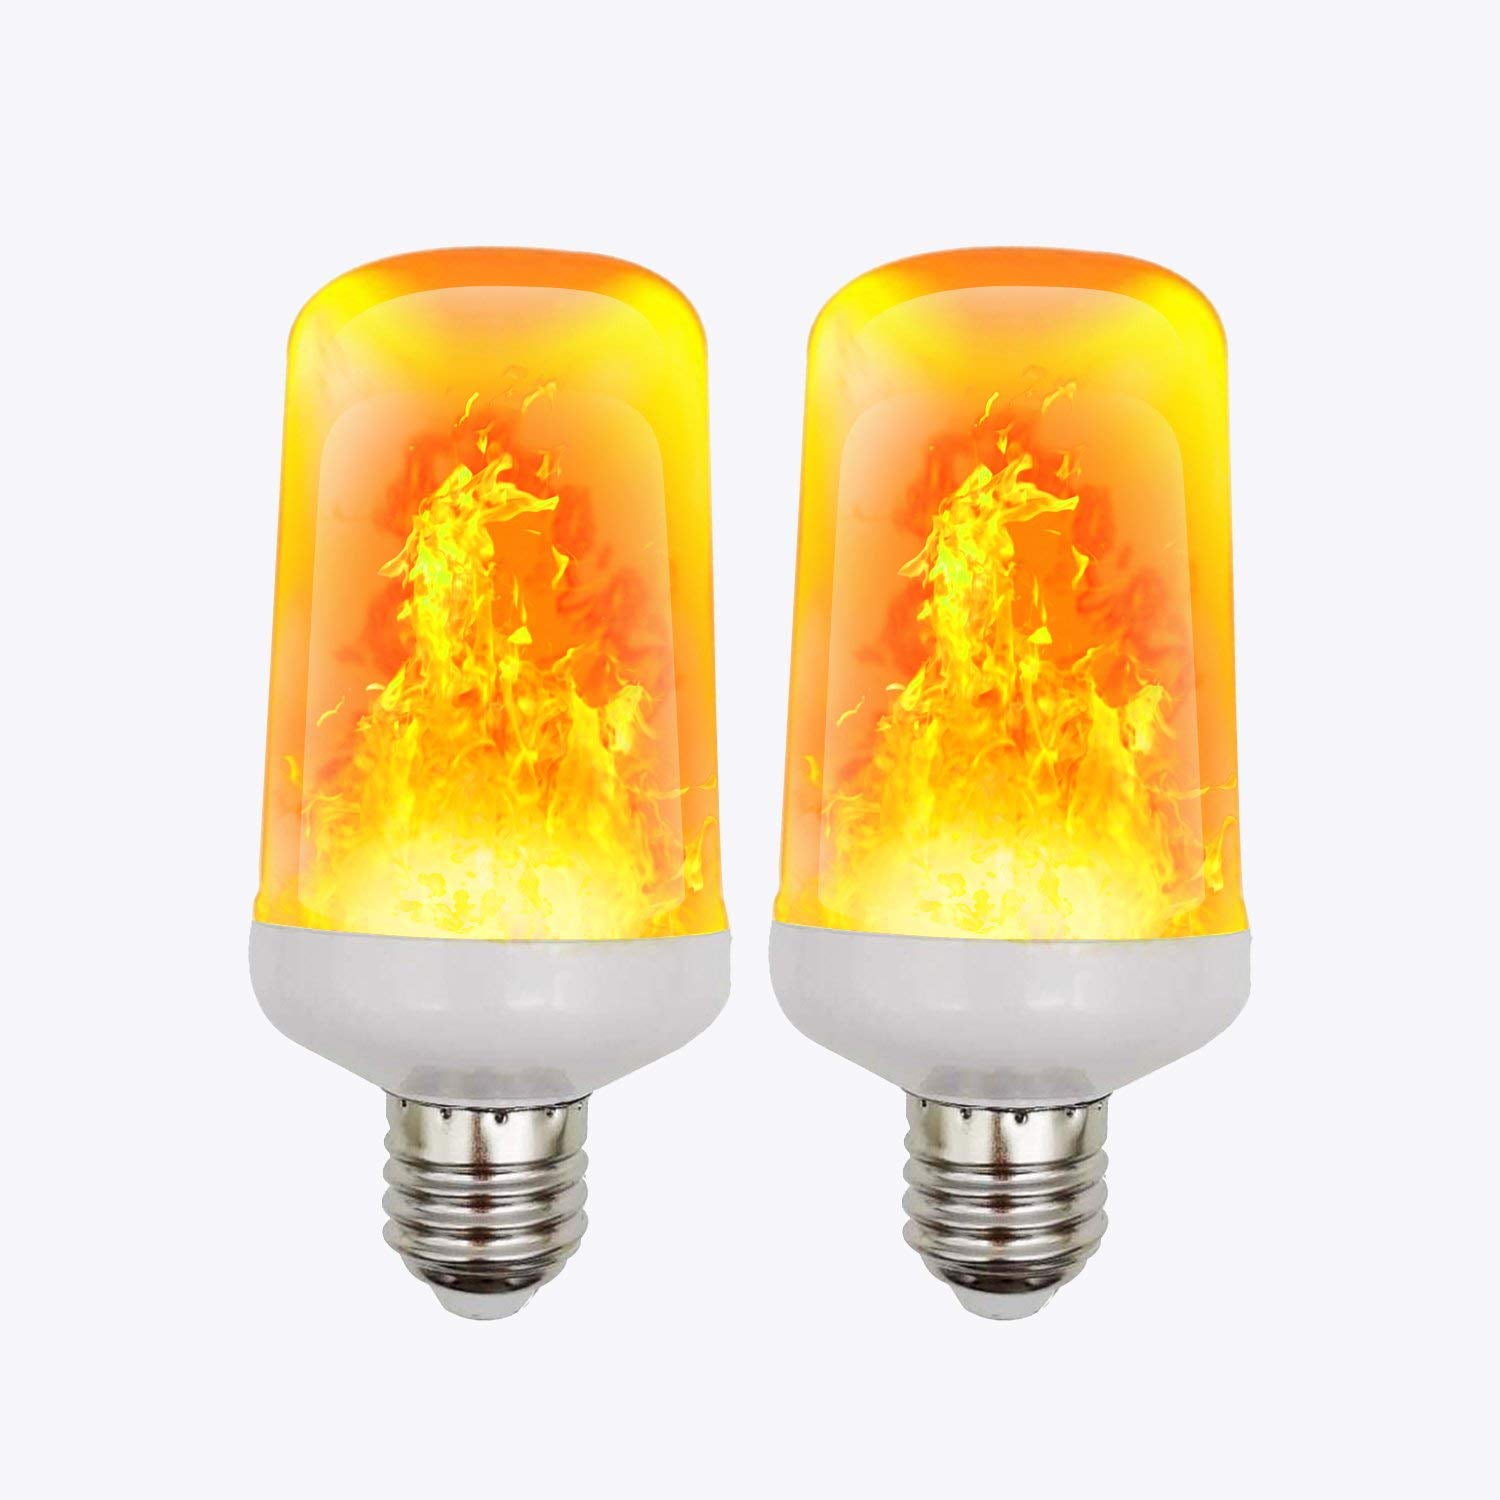 lindre acceptere kasseapparat Lightahead LED Simulated Realistic Burning Fire Flame Effect Flickering Light  Bulb (2 Pack) - Walmart.com